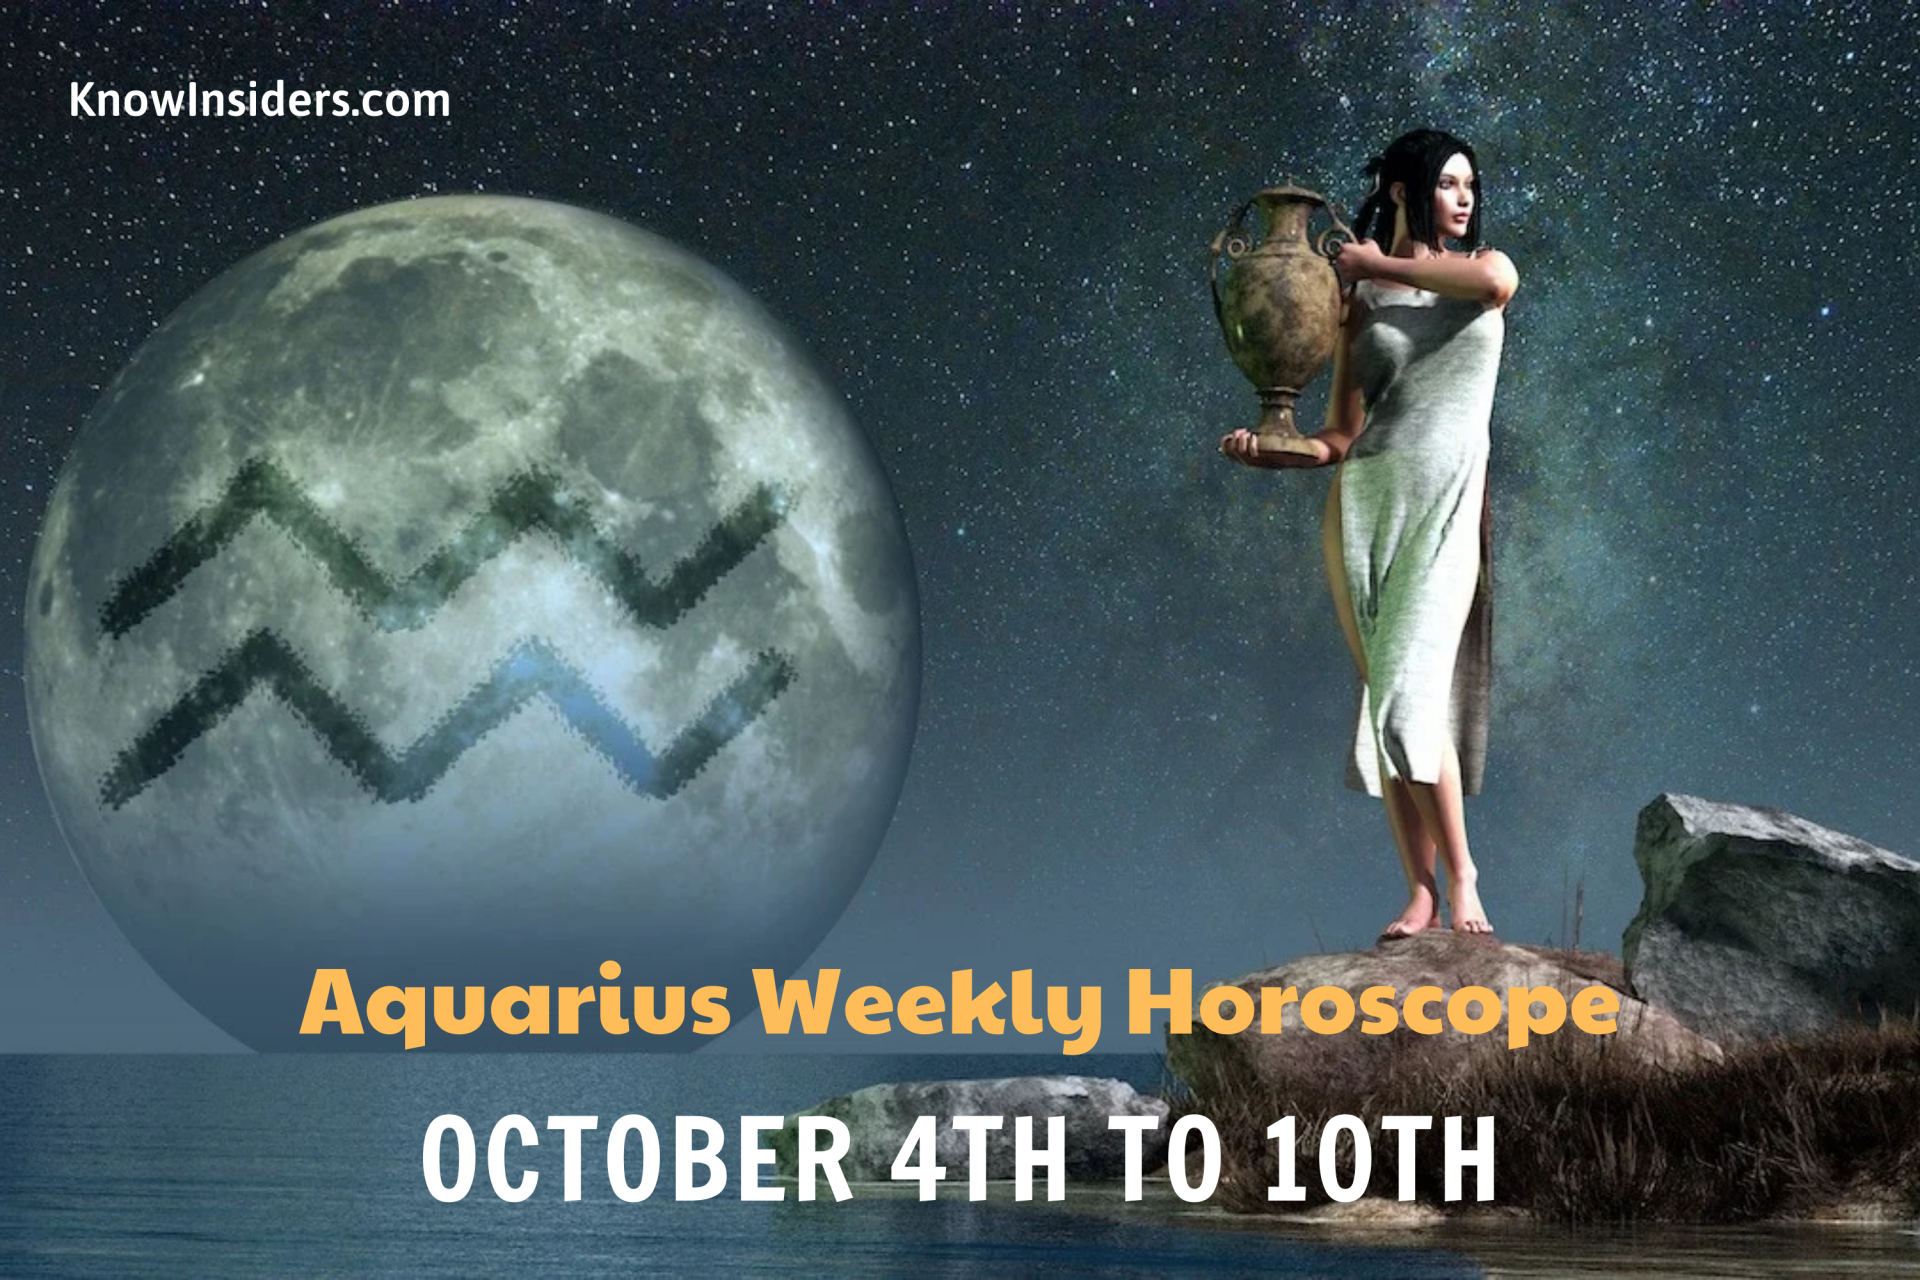 AQUARIUS Weekly Horoscope 4 to 10 October 2021: Prediction for Love, Money, Career and Health